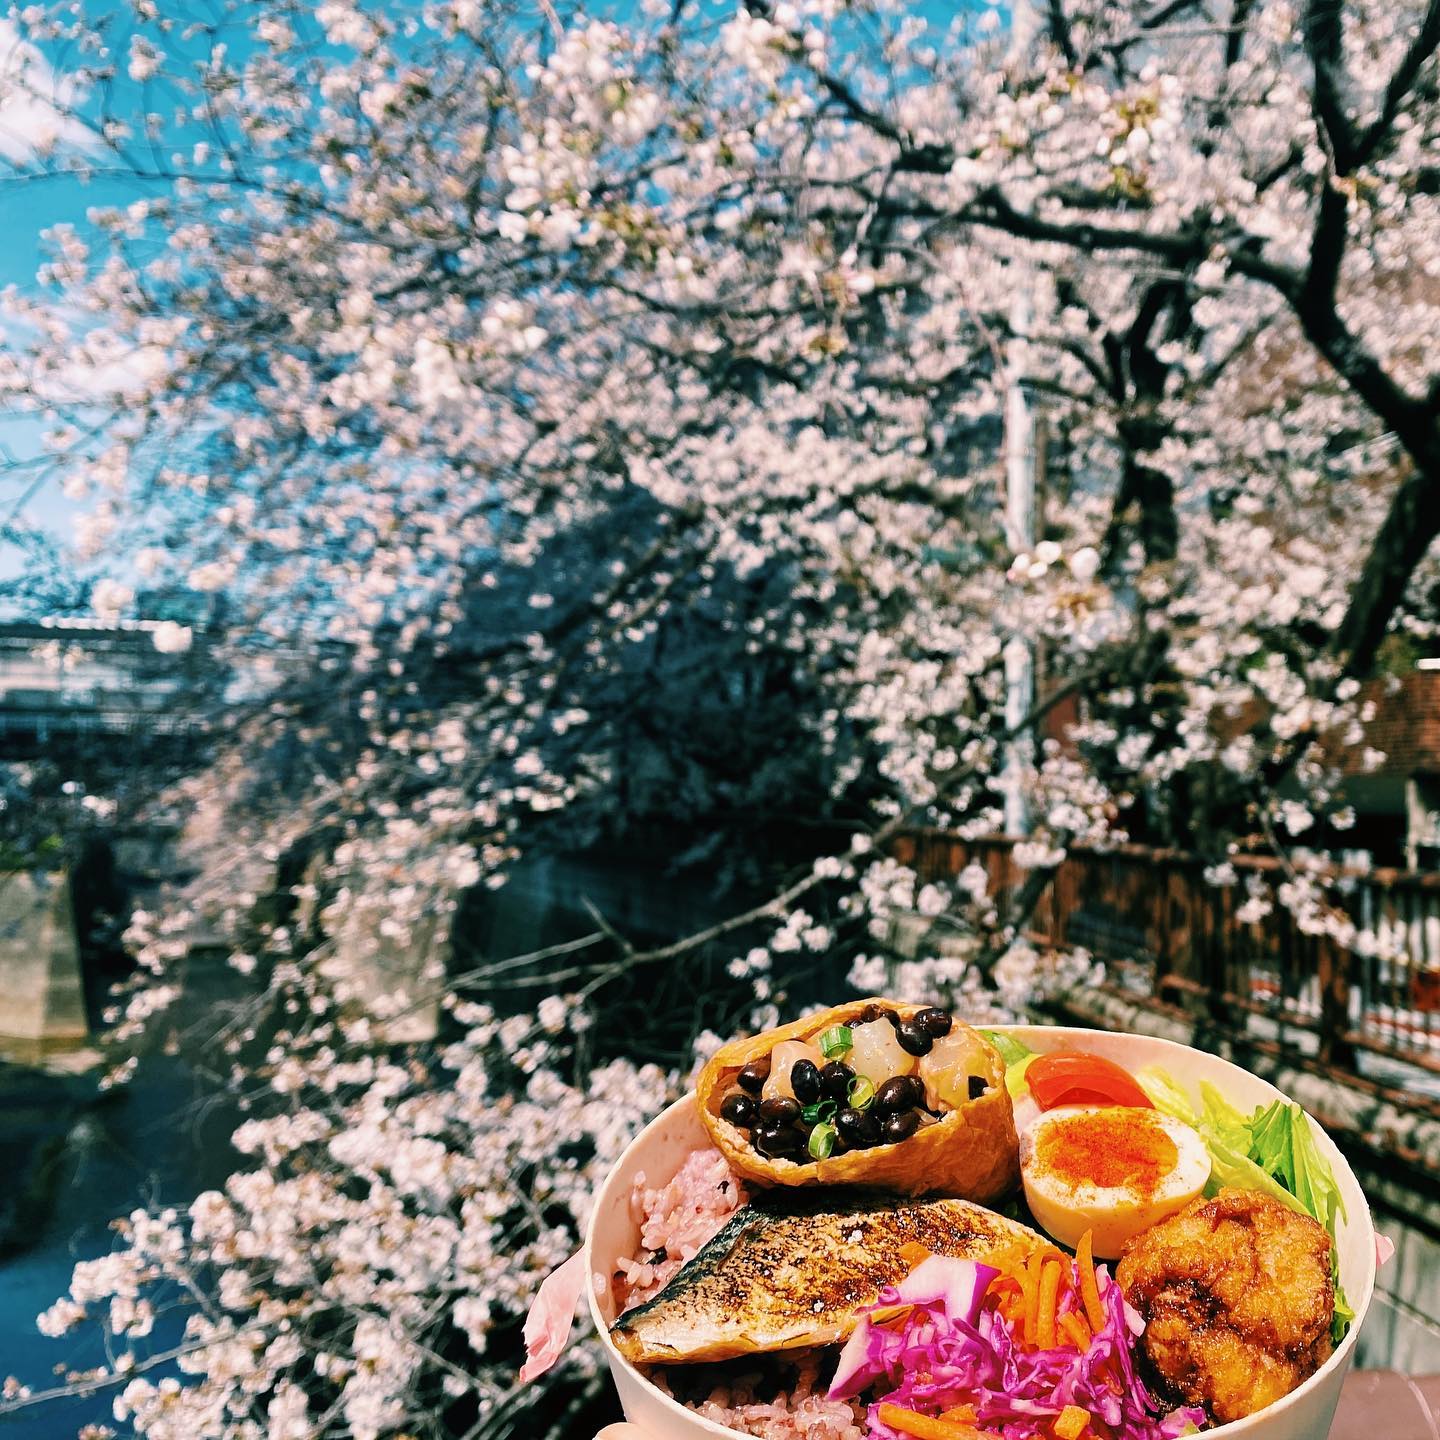 _
Cherry blossom season at the AOI Global Nakameguro office
￼
Beautiful Bento (Japanese packed meal) to accompany our Hanami (flower viewing)

#weeklyinspiration﻿ #tokyocherryblossom⁣